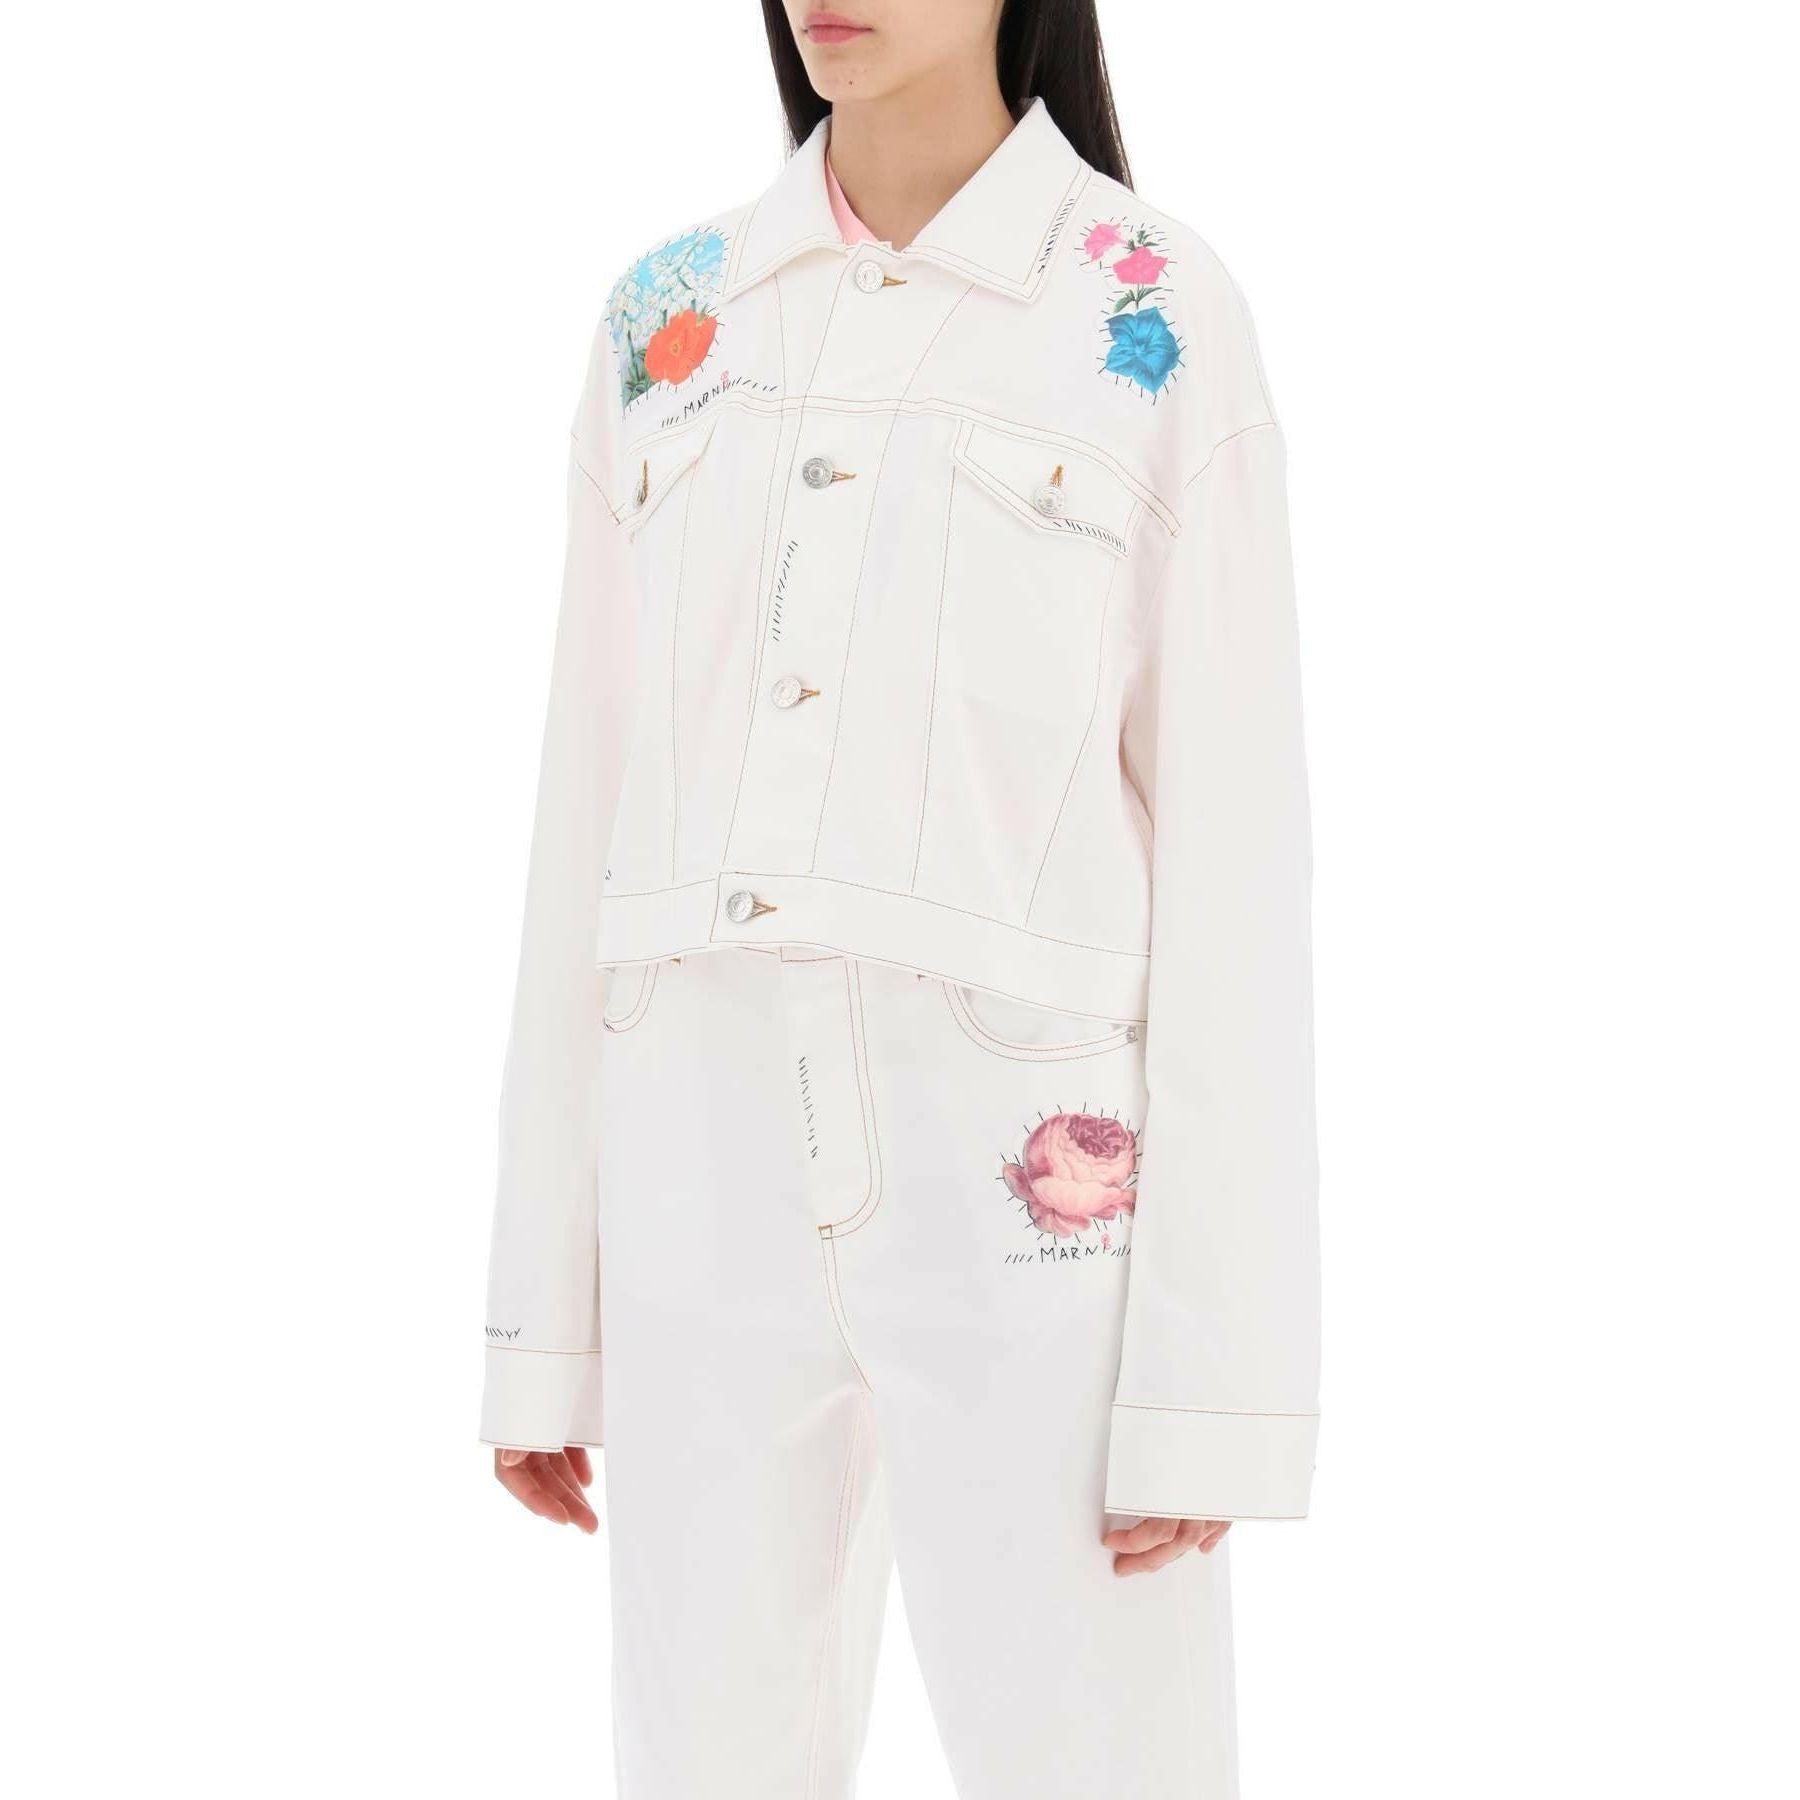 Cropped Denim Jacket With Flower Patches And Embroidery MARNI JOHN JULIA.